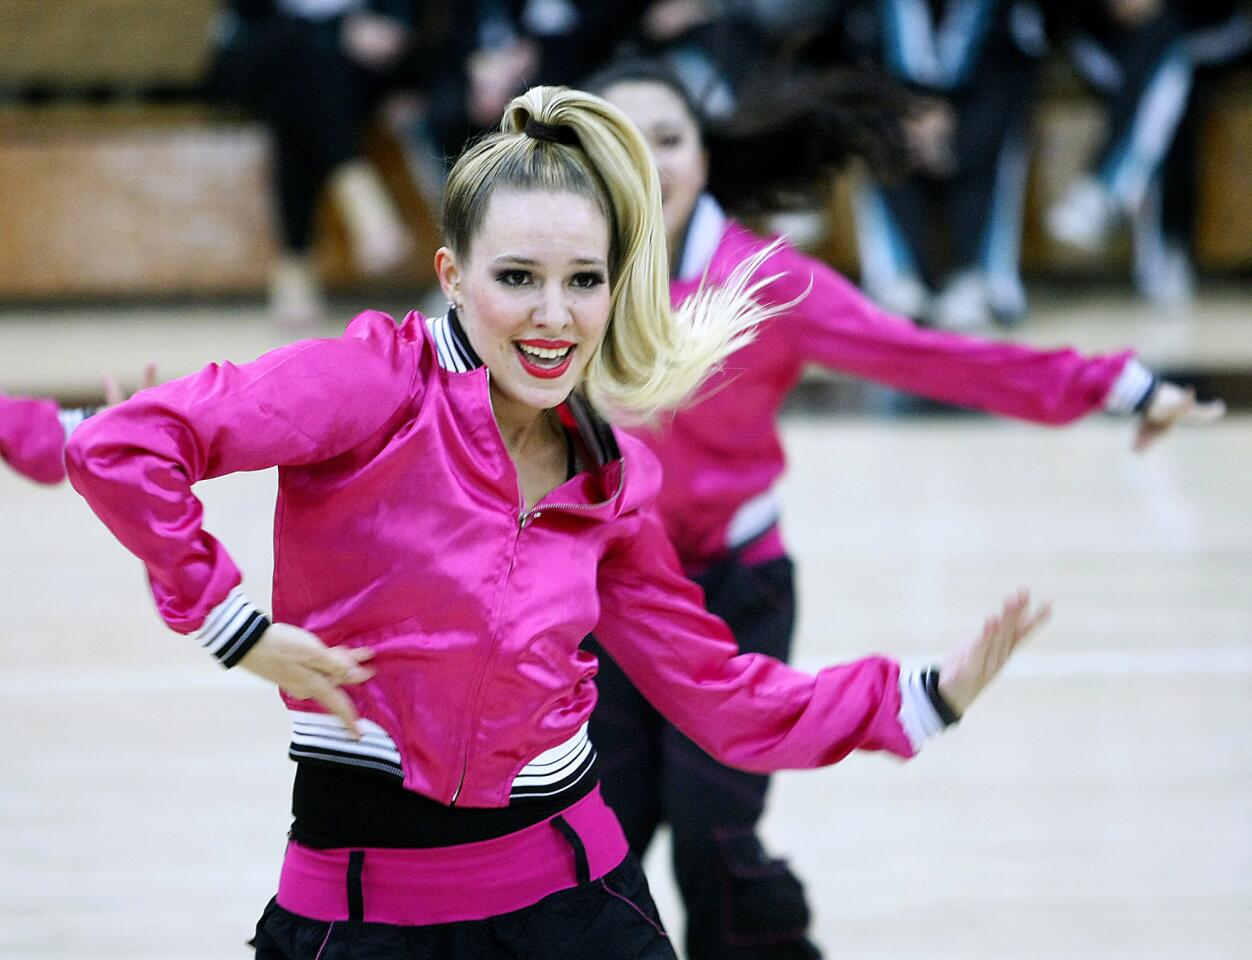 Photo Gallery: CADTD dance & drill state championships held at Glendale High School